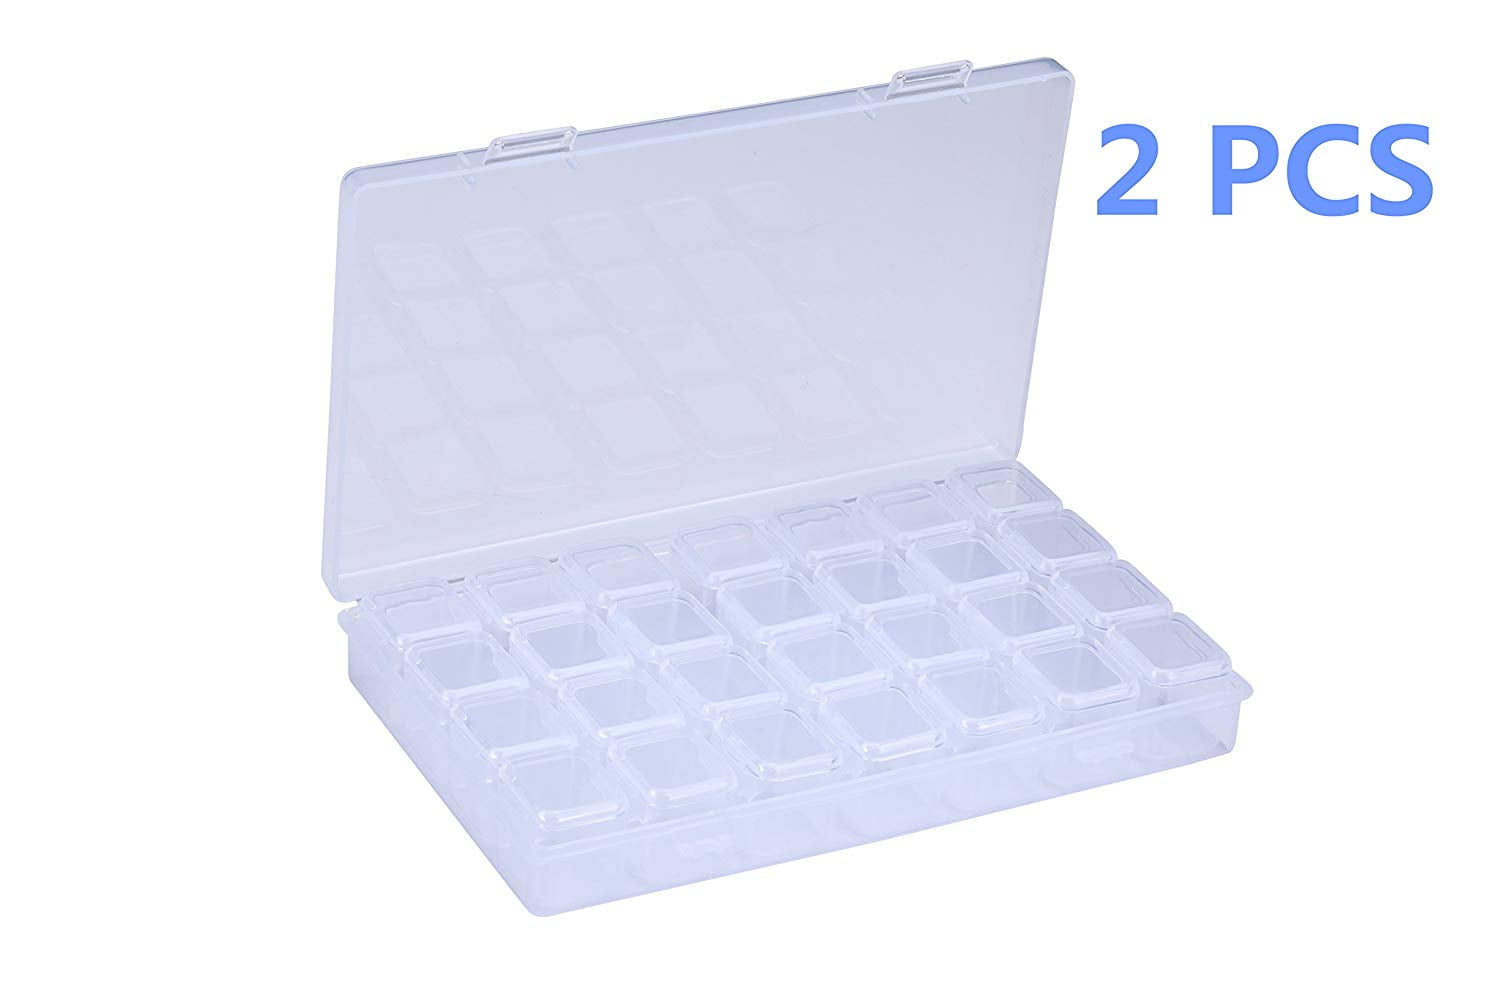 5 Pk Bright White Diamond Painting Trays with Lids and Removable Insert,  Bead, Nail, or Rhinestone Storage Tray by DPG - The Diamond Paint Group